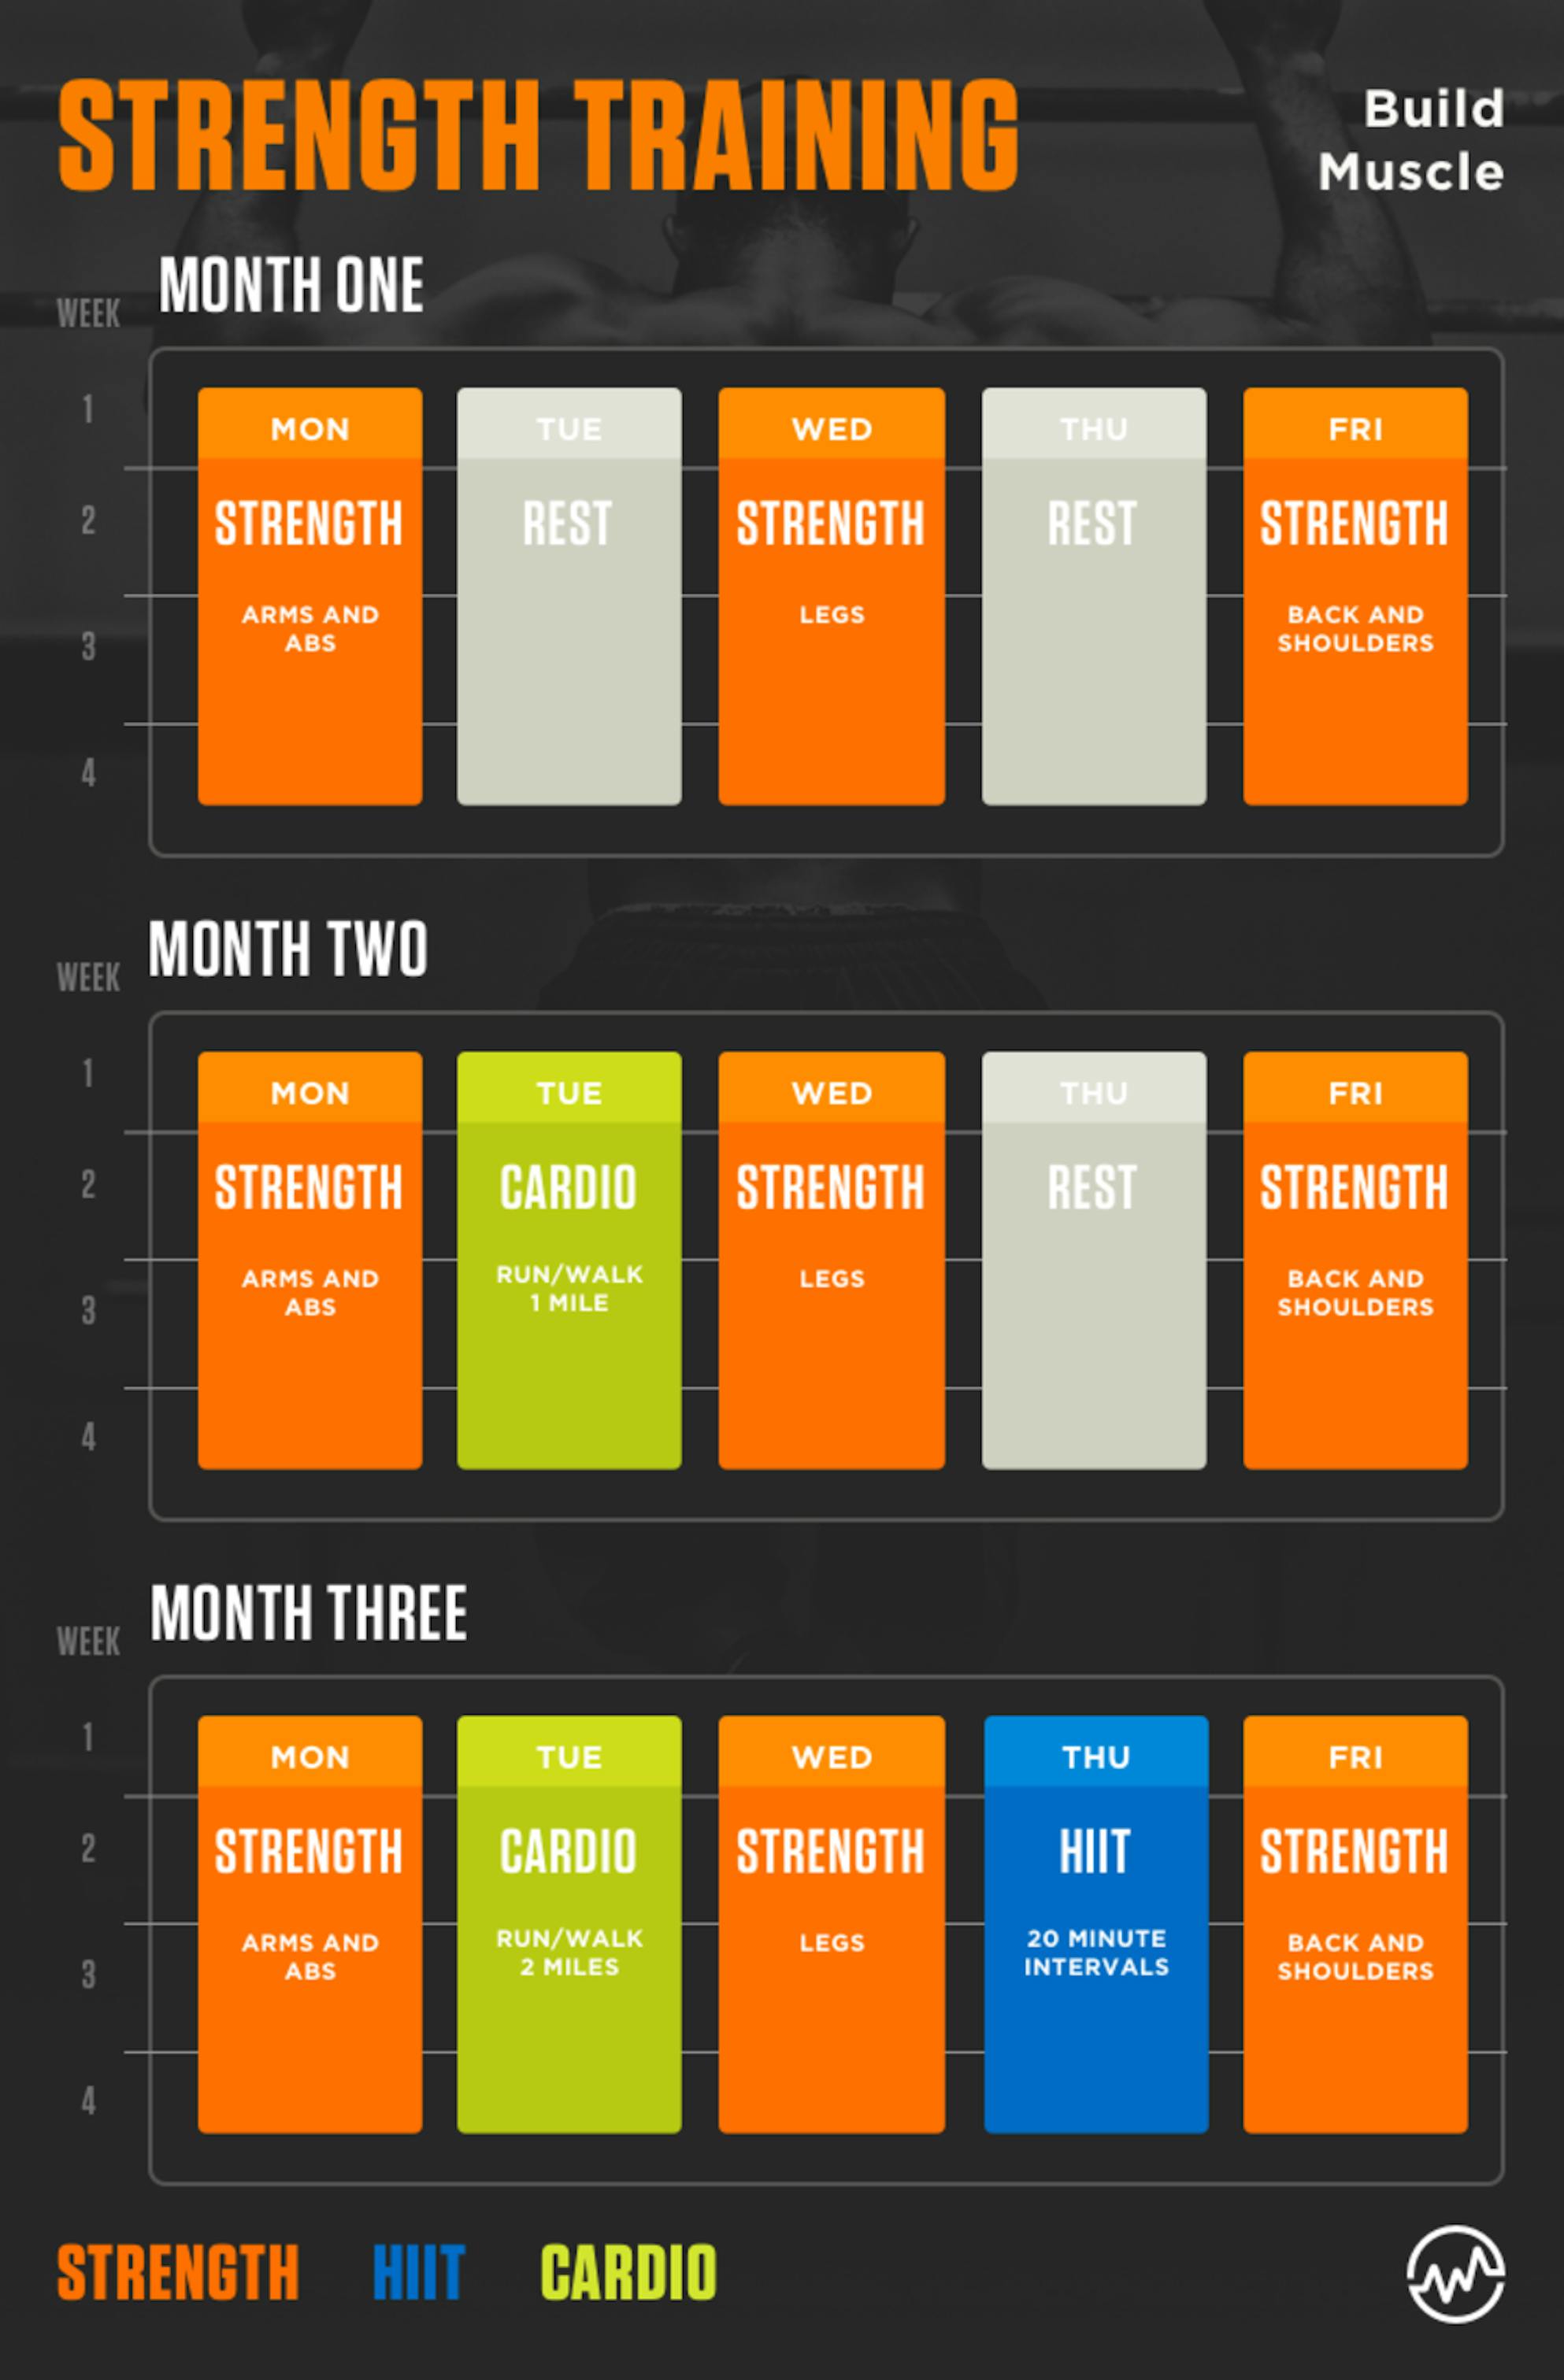 How to create your own workout plan and save money: strength training